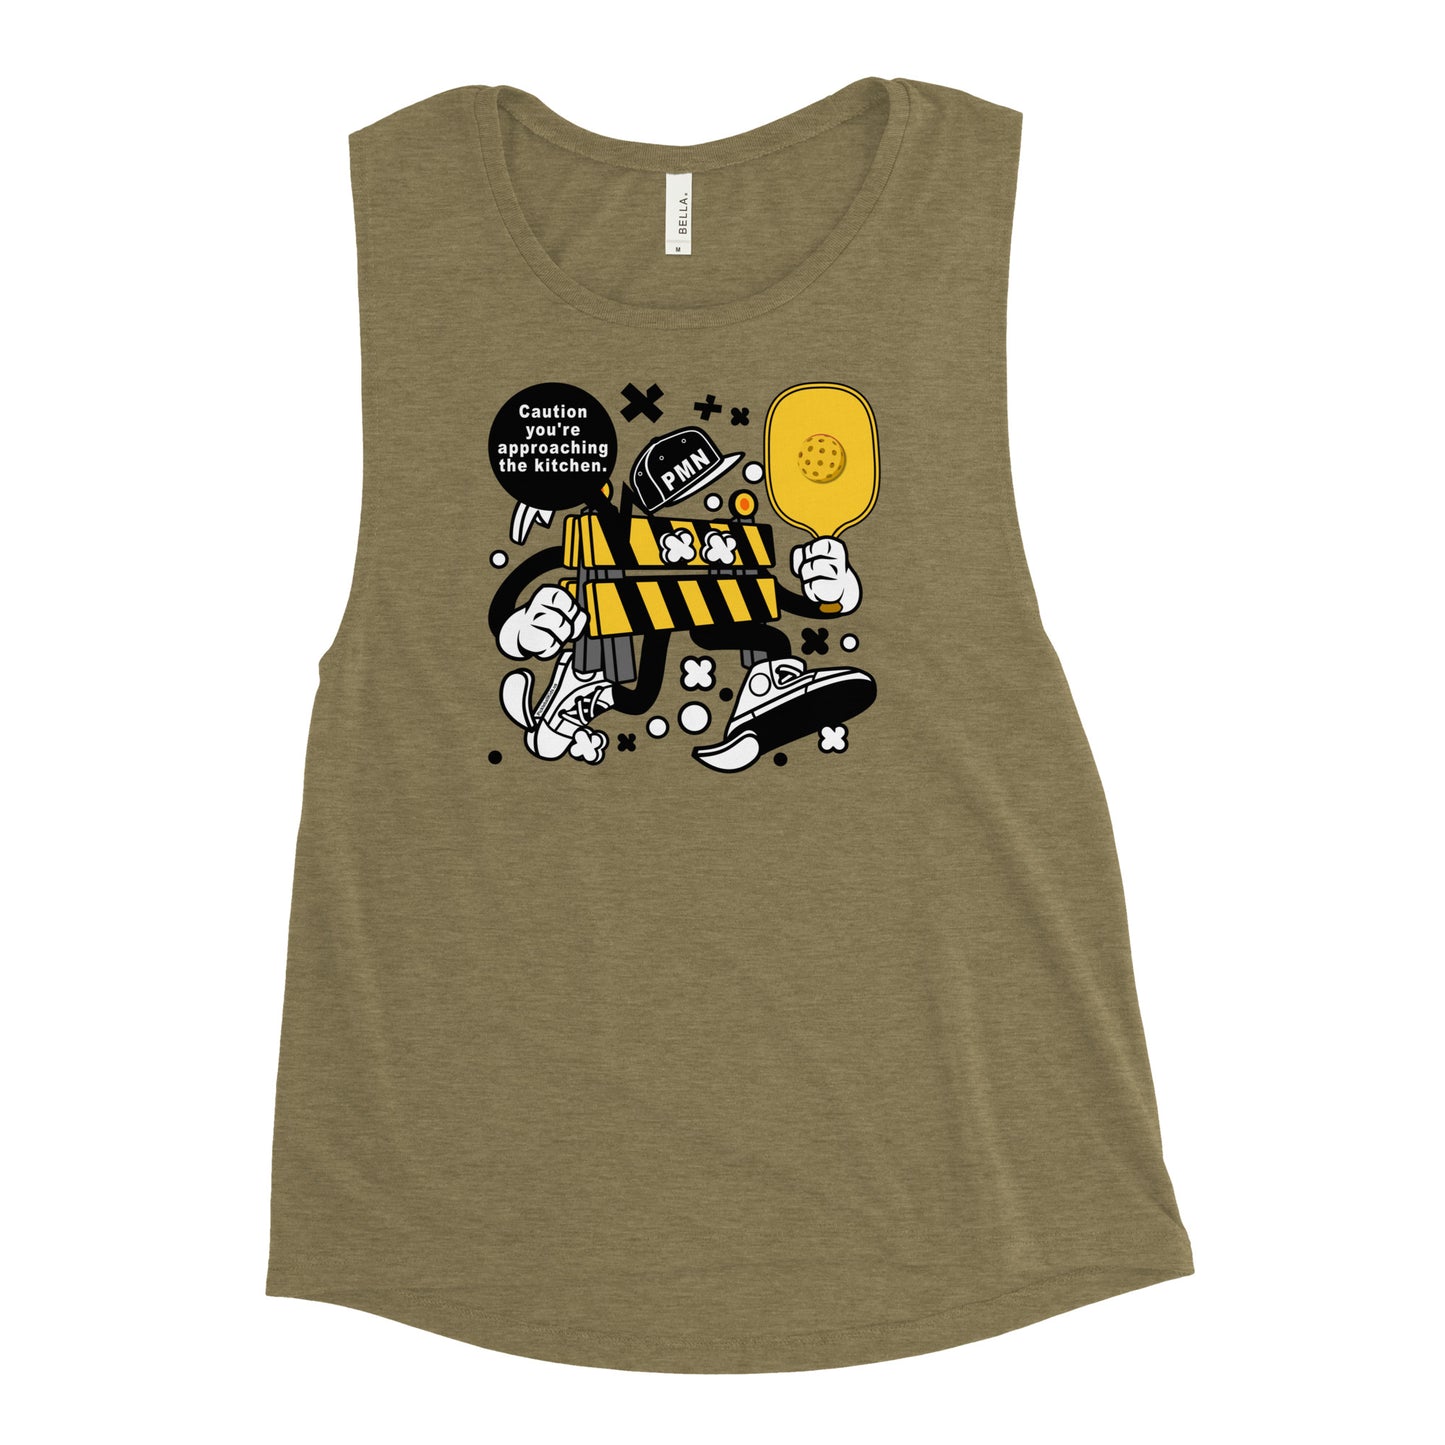 Ladies’ Pickleball Muscle Tank, "Caution, You're Approaching The Kitchen."